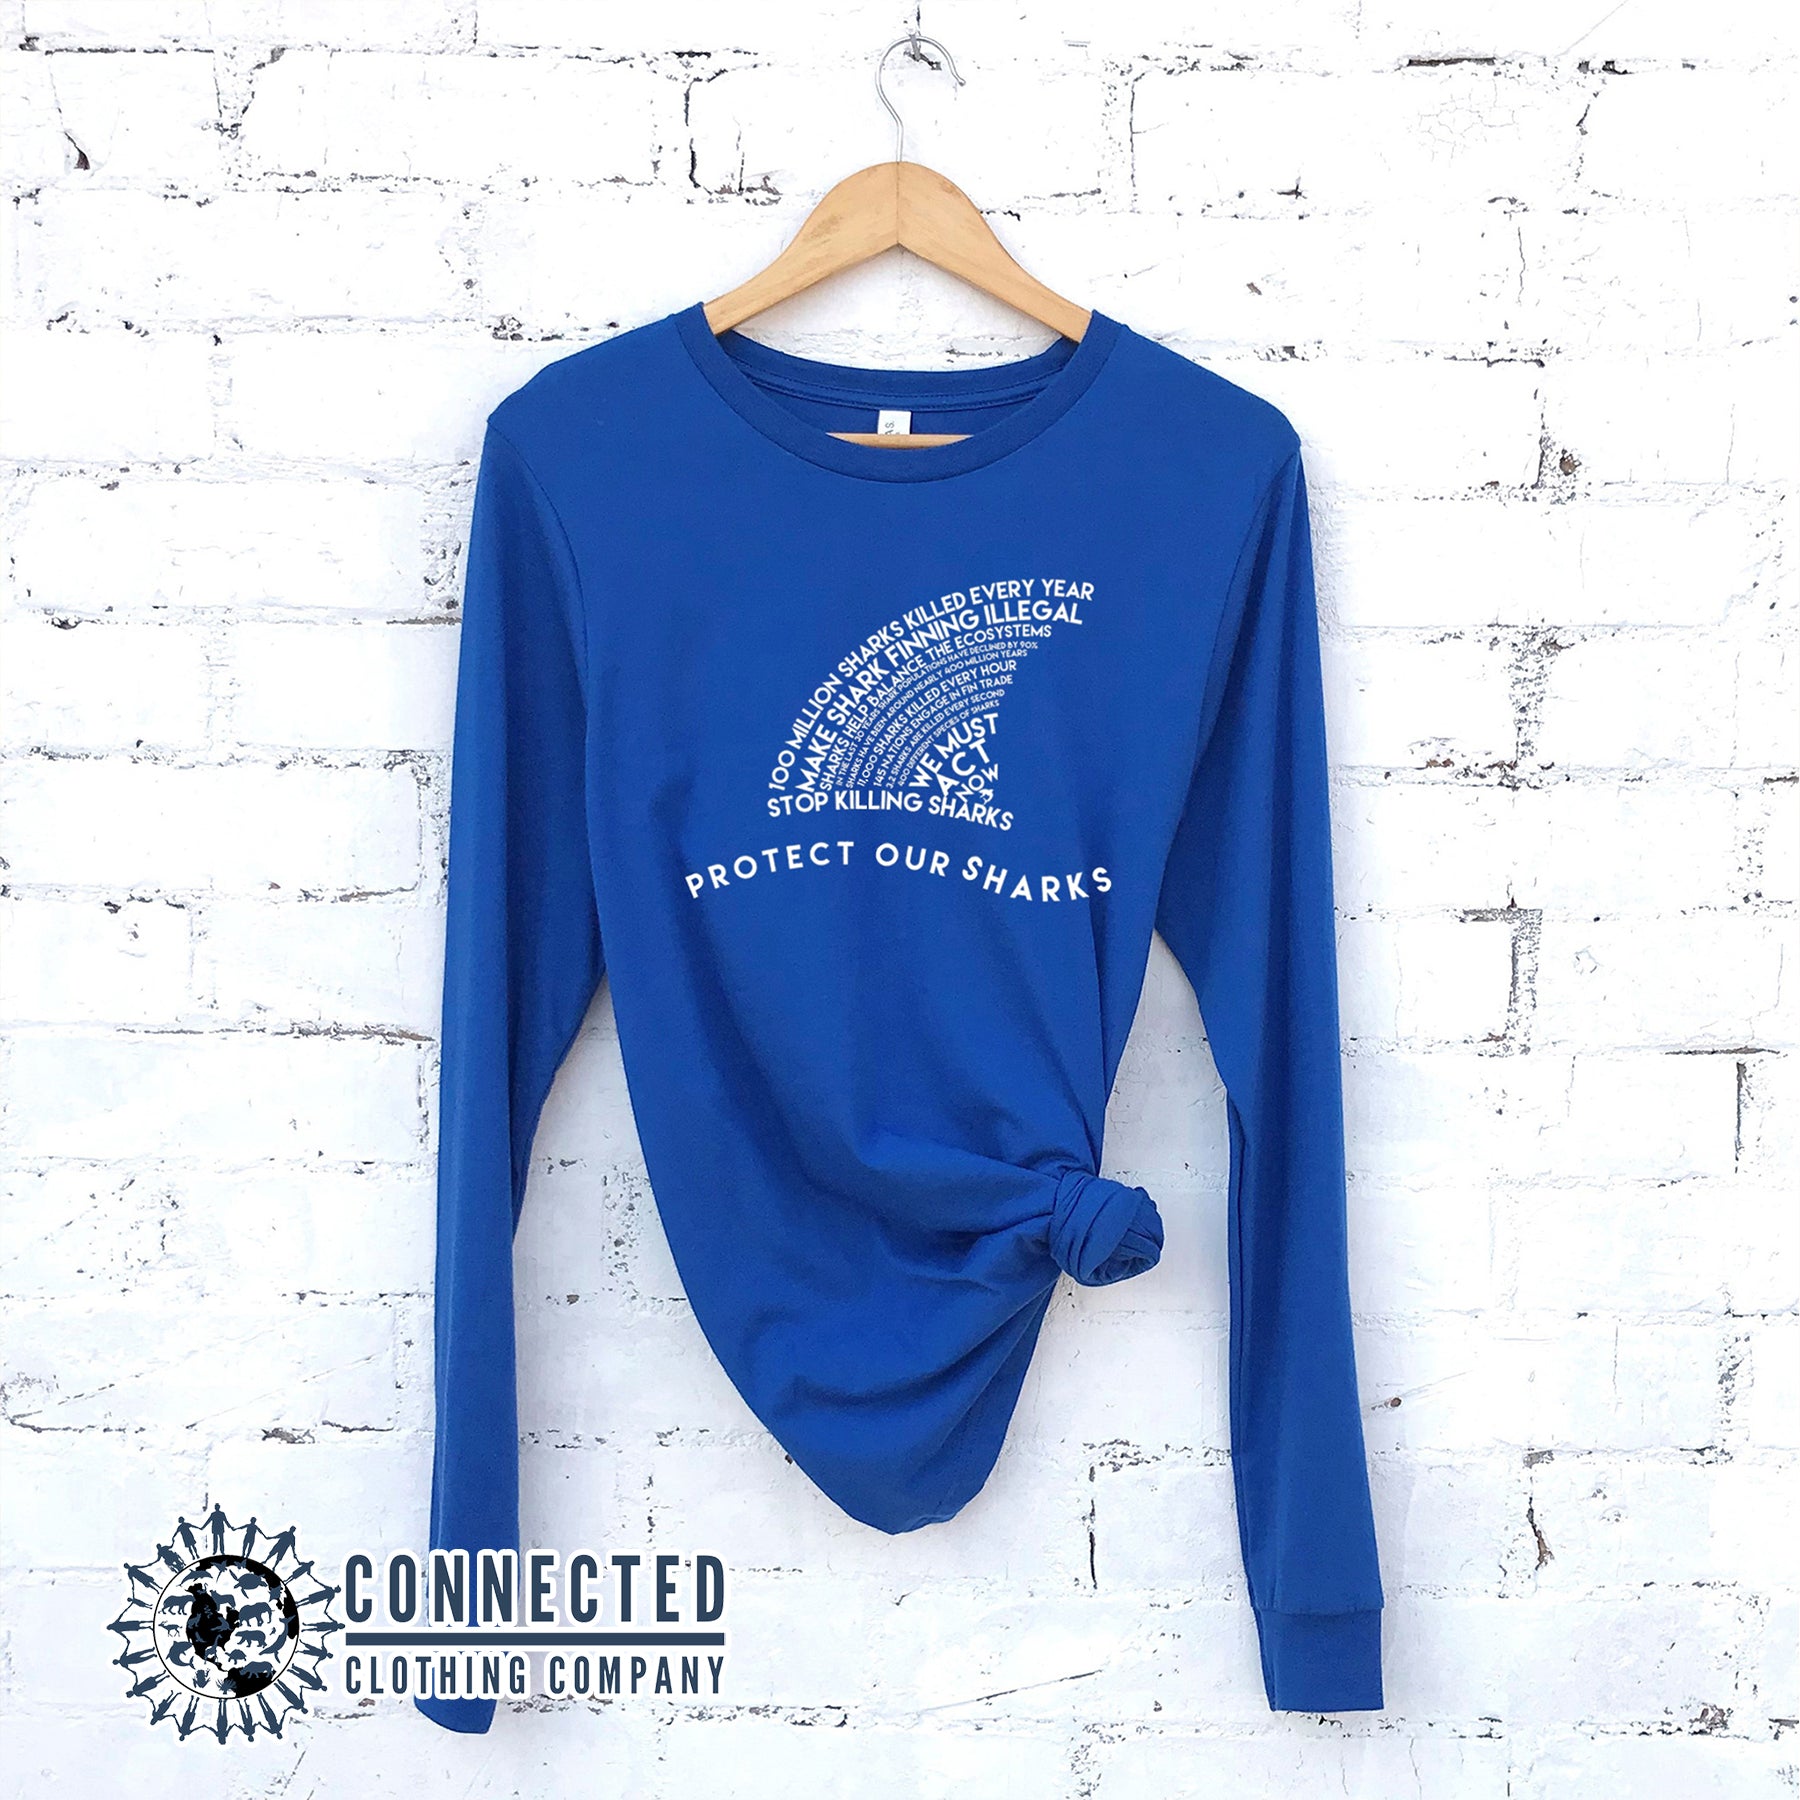 True Royal Blue Protect Our Sharks Long-Sleeve Tee - architectconstructor - Ethically and Sustainably Made - 10% donated to Oceana shark conservation